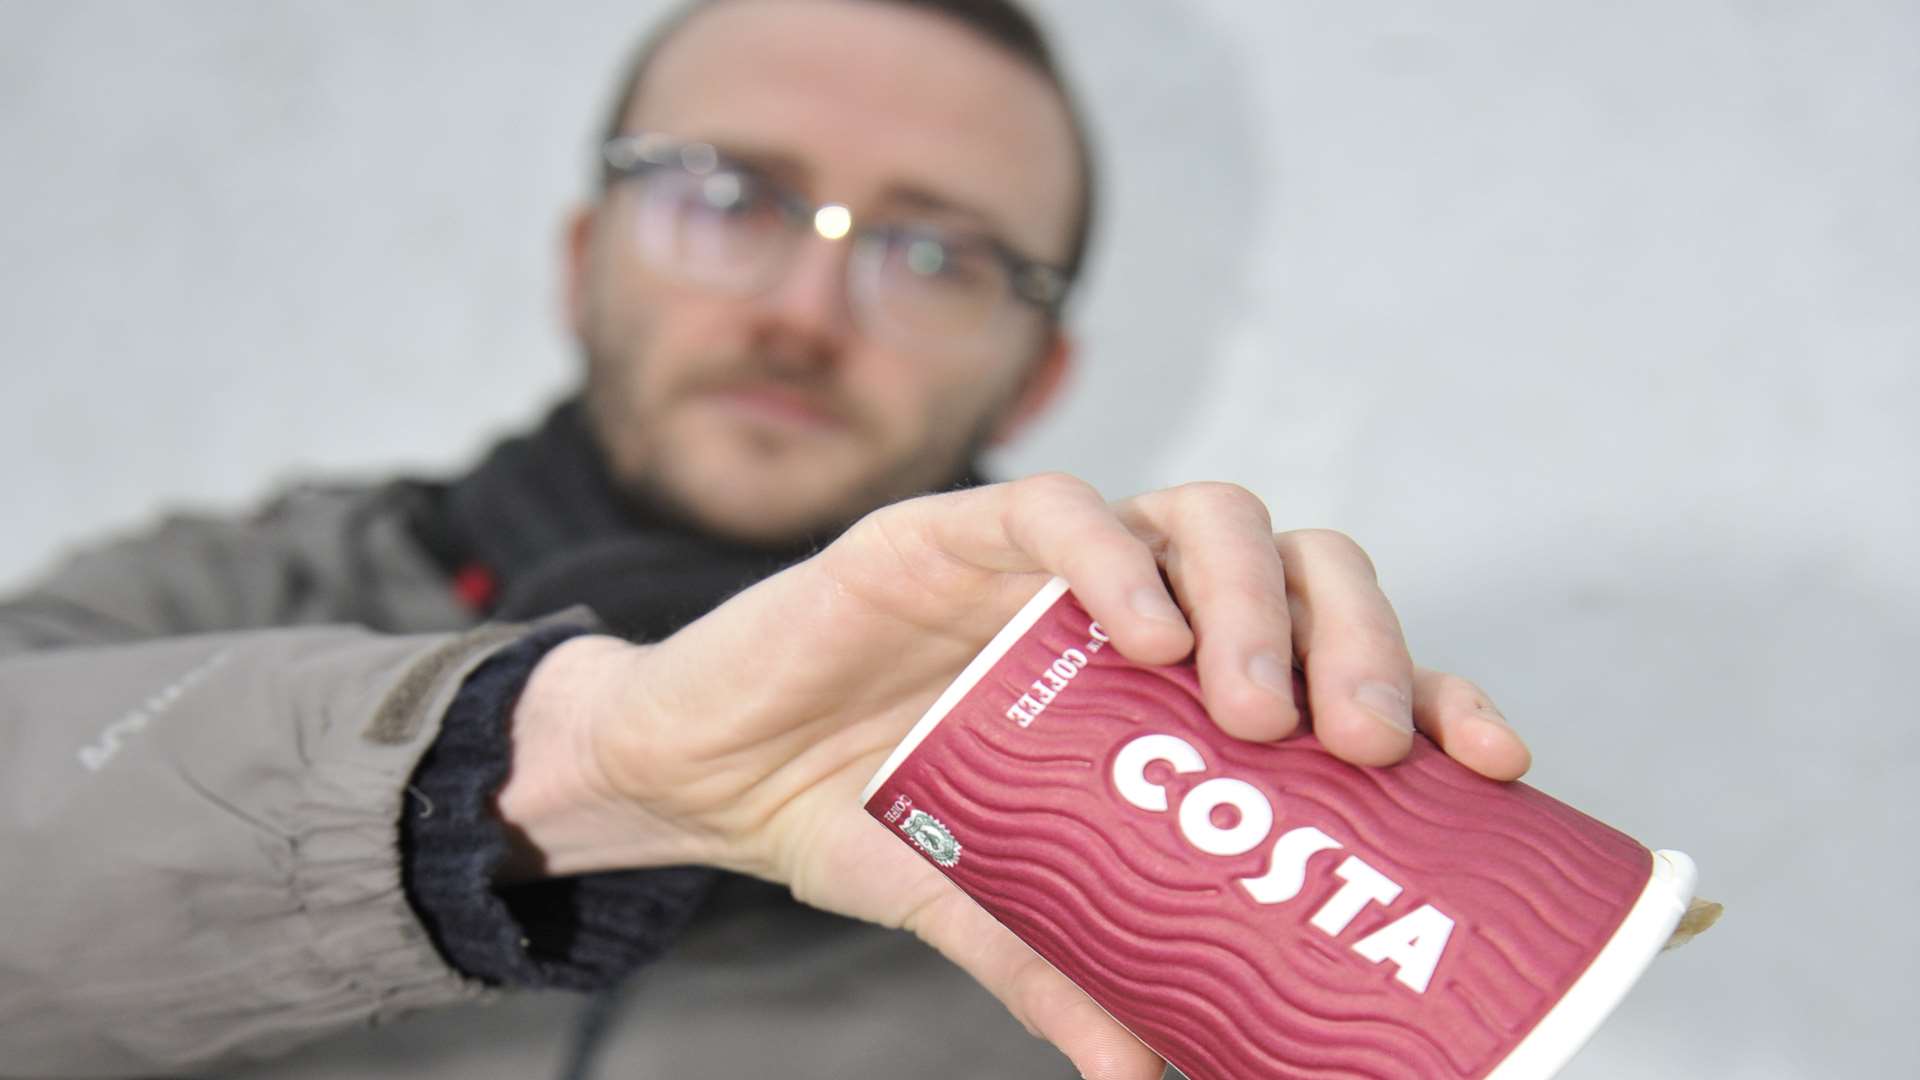 Gavin McGregor pours away a cup of Costa coffee